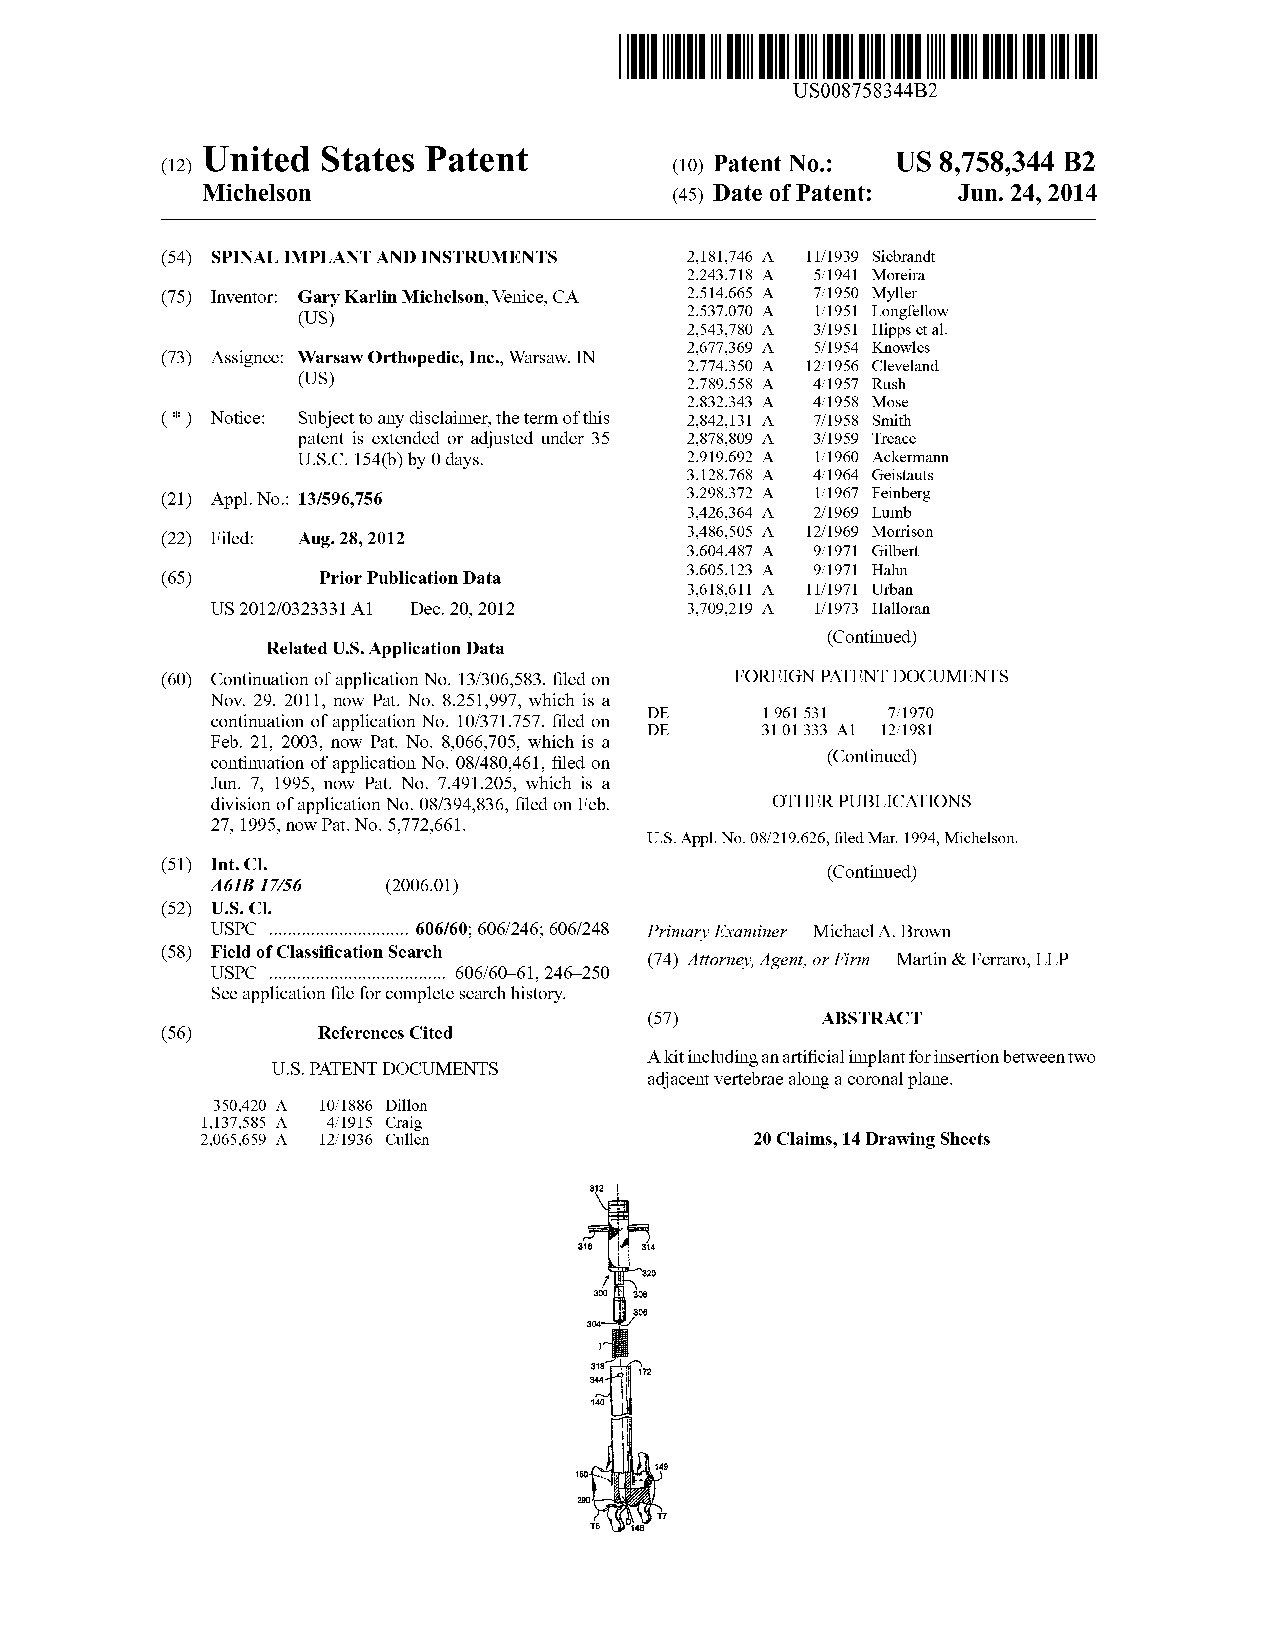 Spinal implant and instruments - Patent 8,758,344